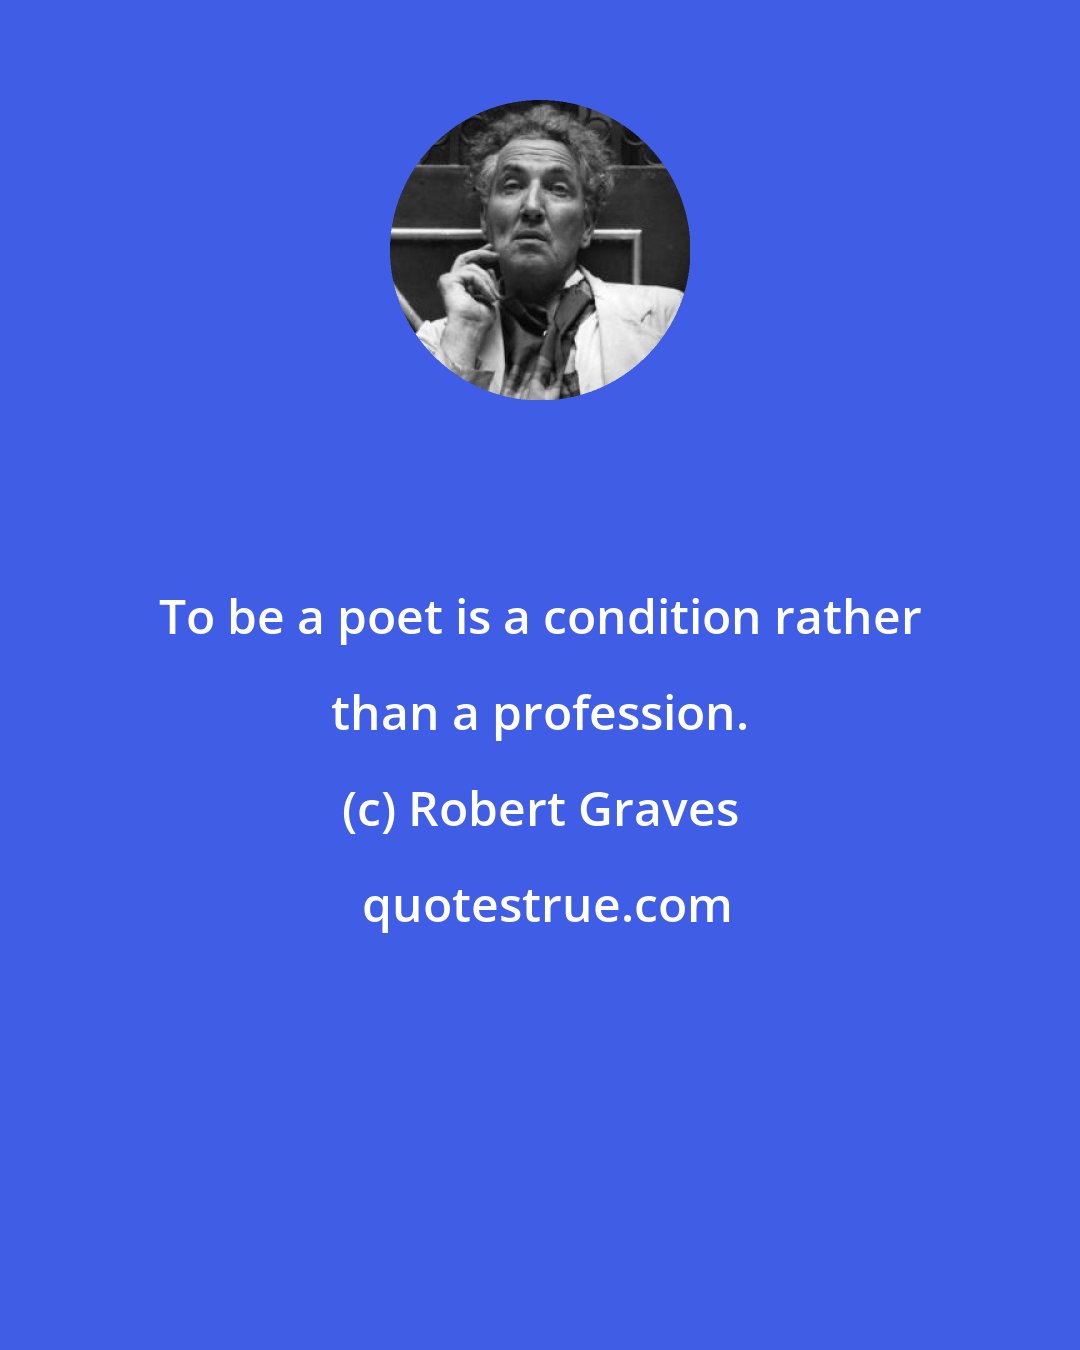 Robert Graves: To be a poet is a condition rather than a profession.